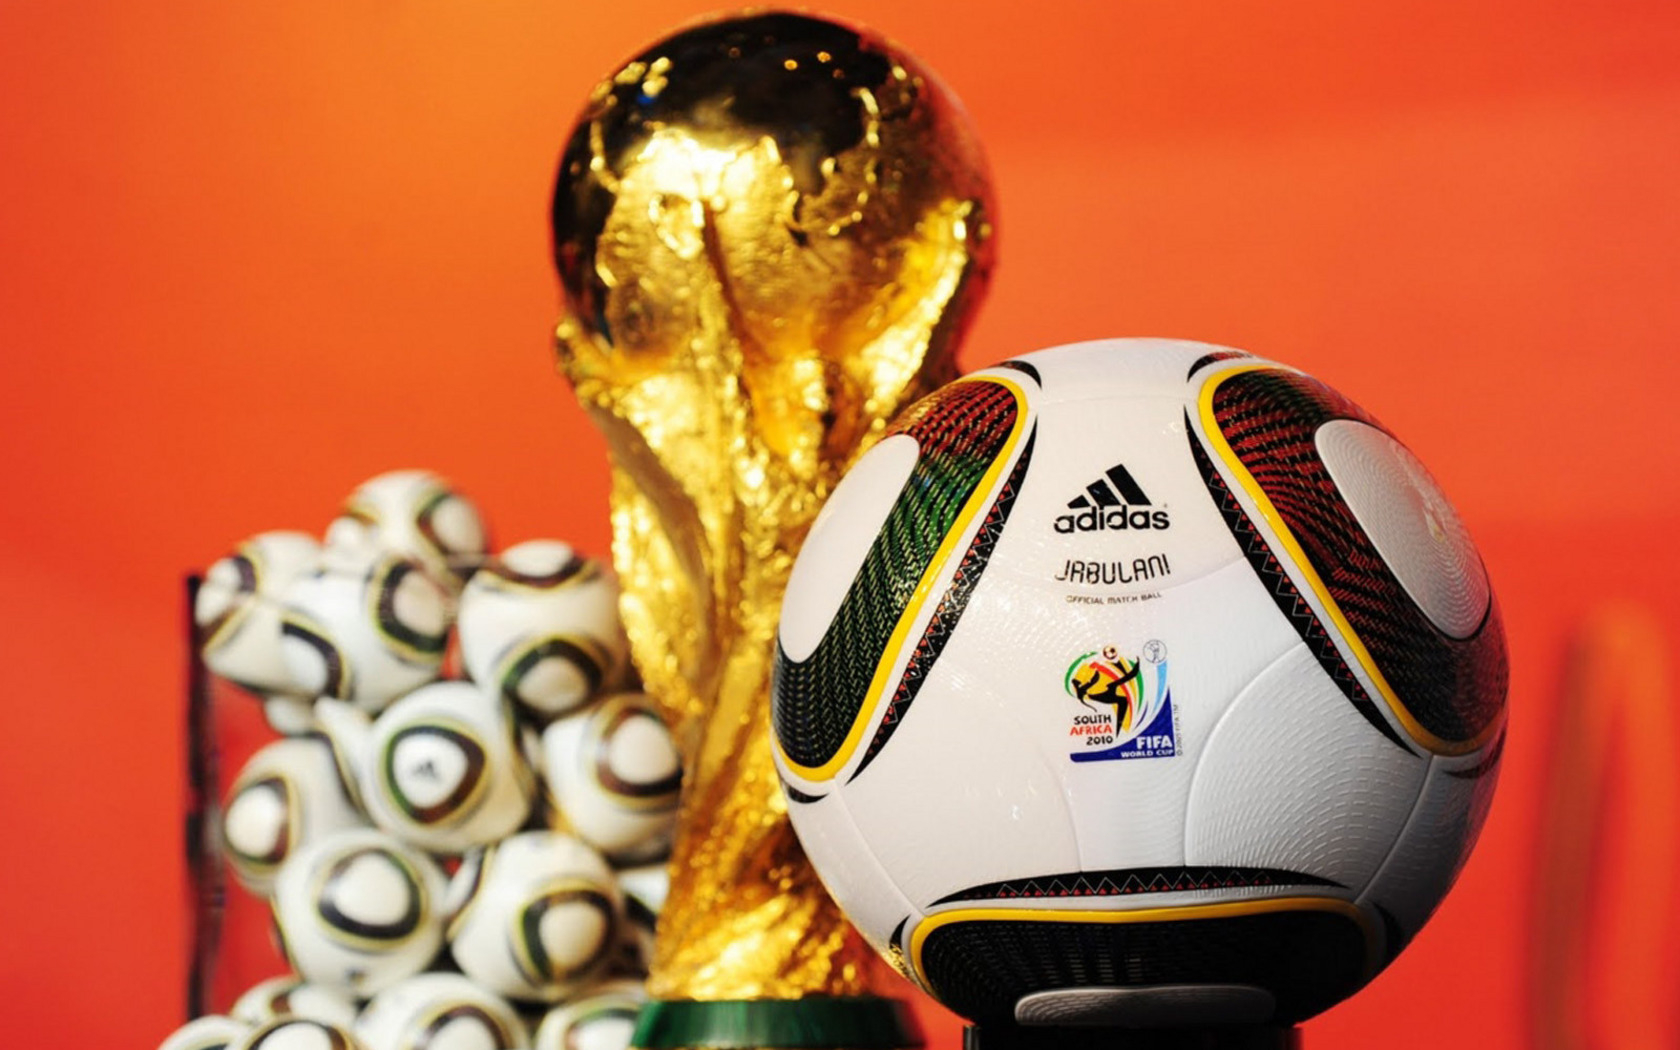 The World championship on football 2010, the republic of South Africa